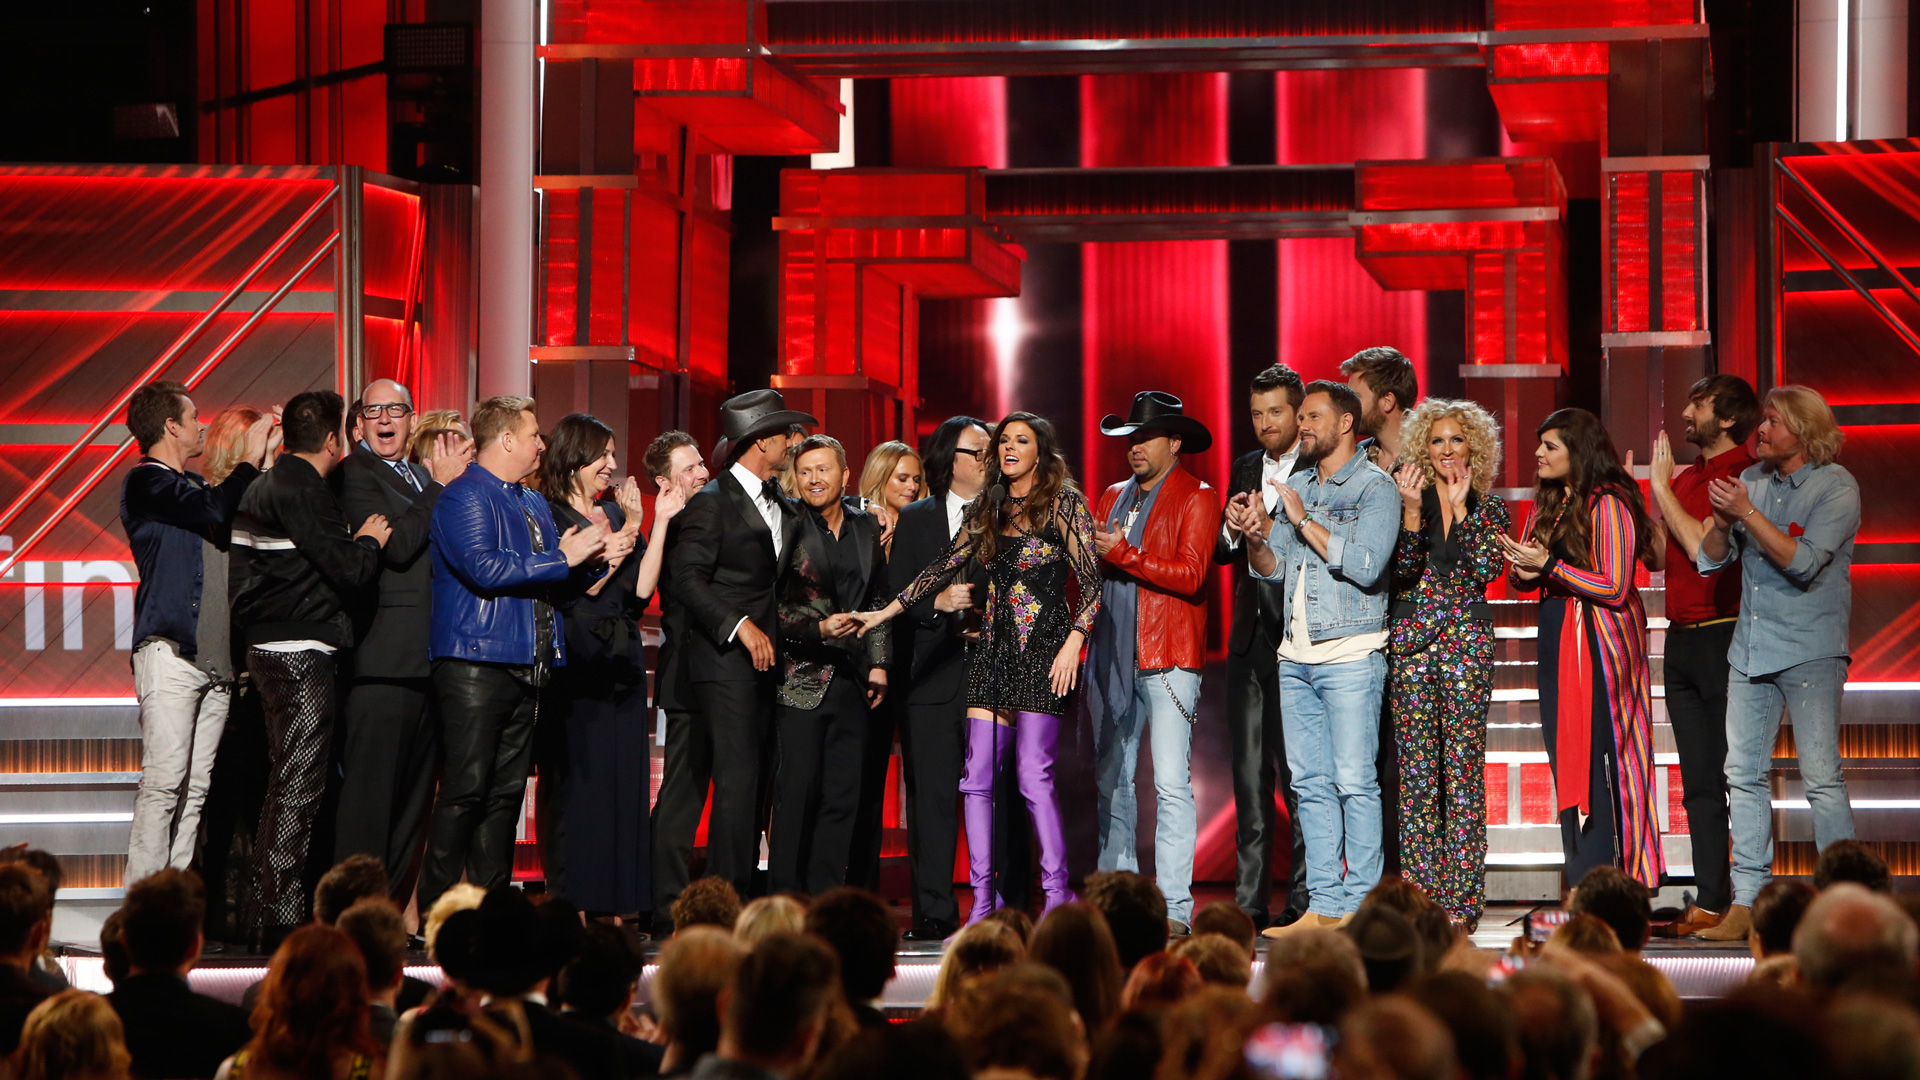 Artists Of Then, Now & Forever wins Video Of The Year presented by Xfinity at the 52nd ACM Awards